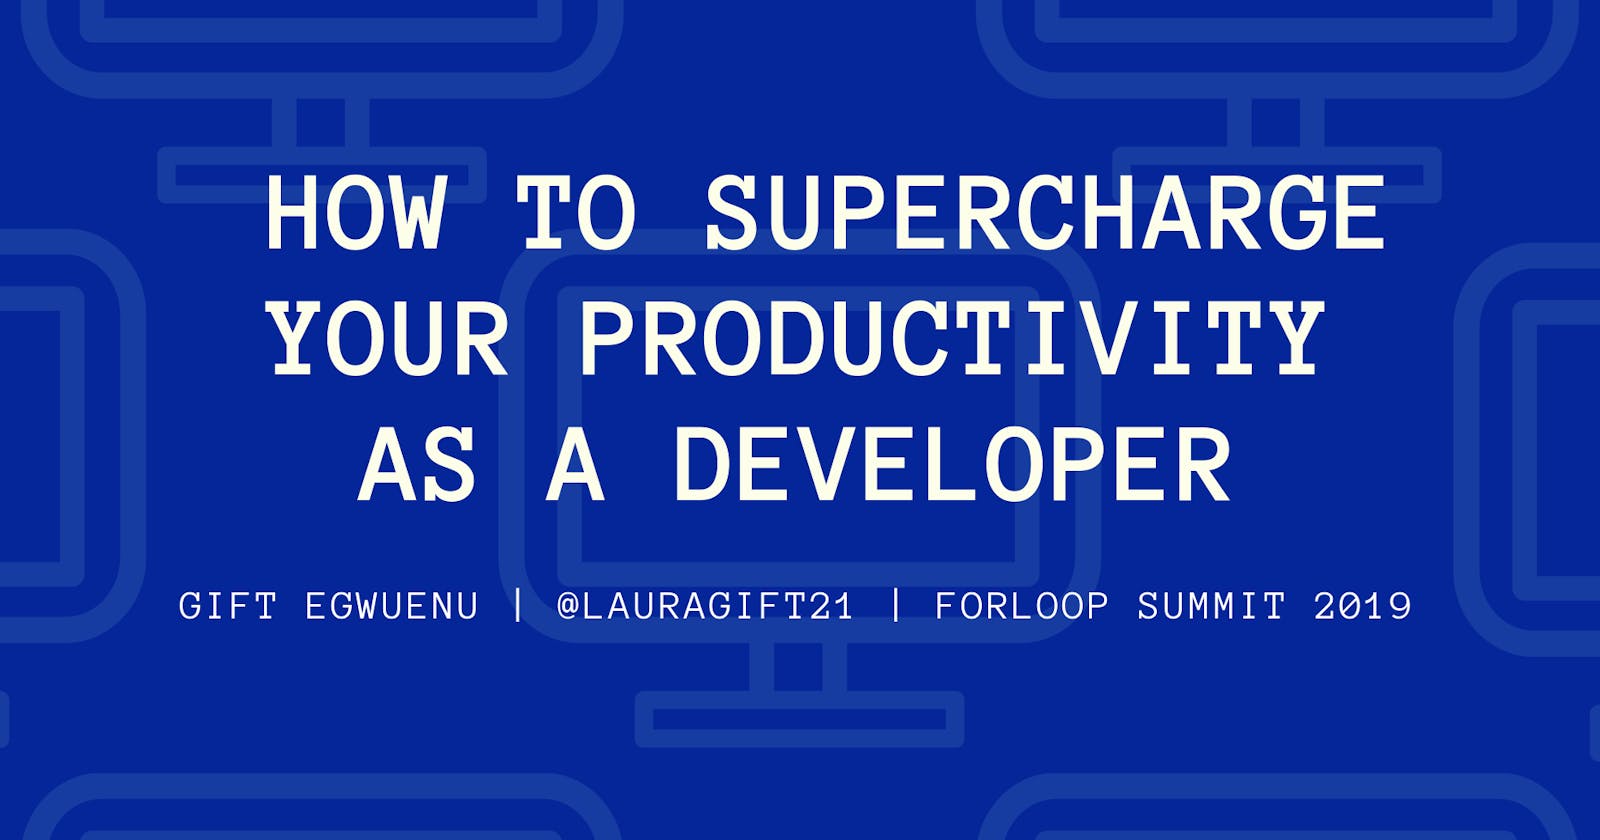 How To Supercharge Your Productivity As A Developer